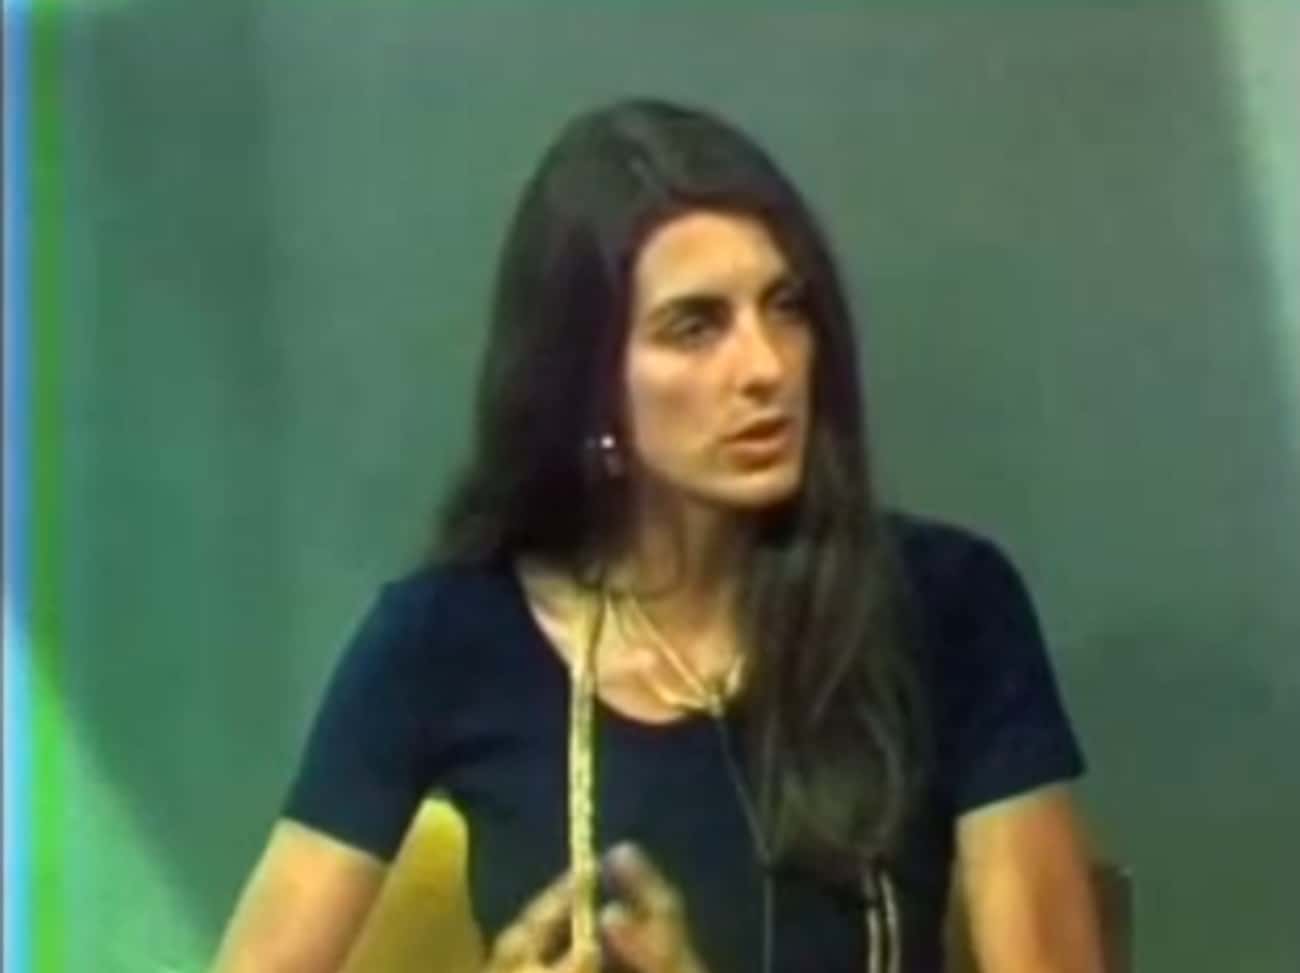 Reporter Christine Chubbuck Committed The Act On Live TV